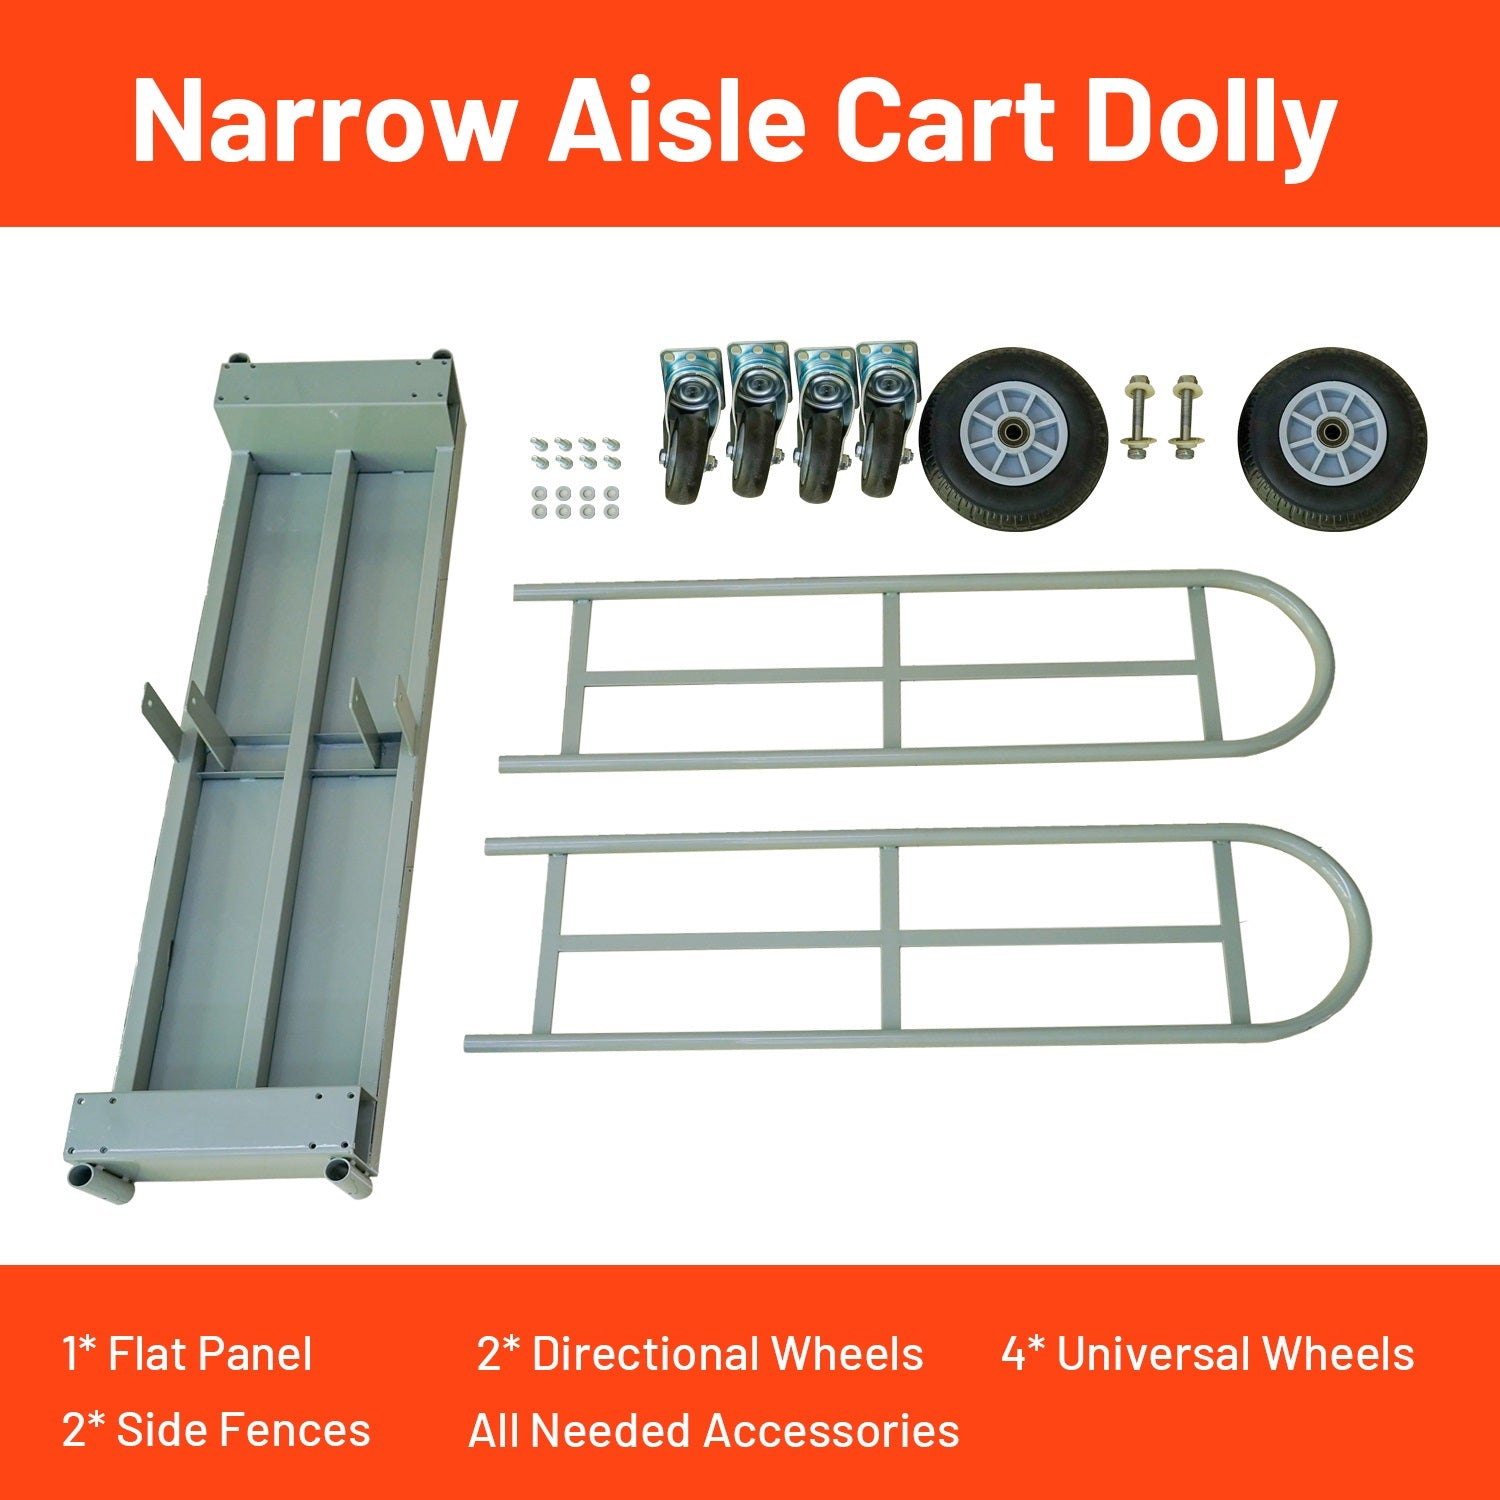 60"x16" Heavy Duty U- Boat Cart with Thick Steel Deck